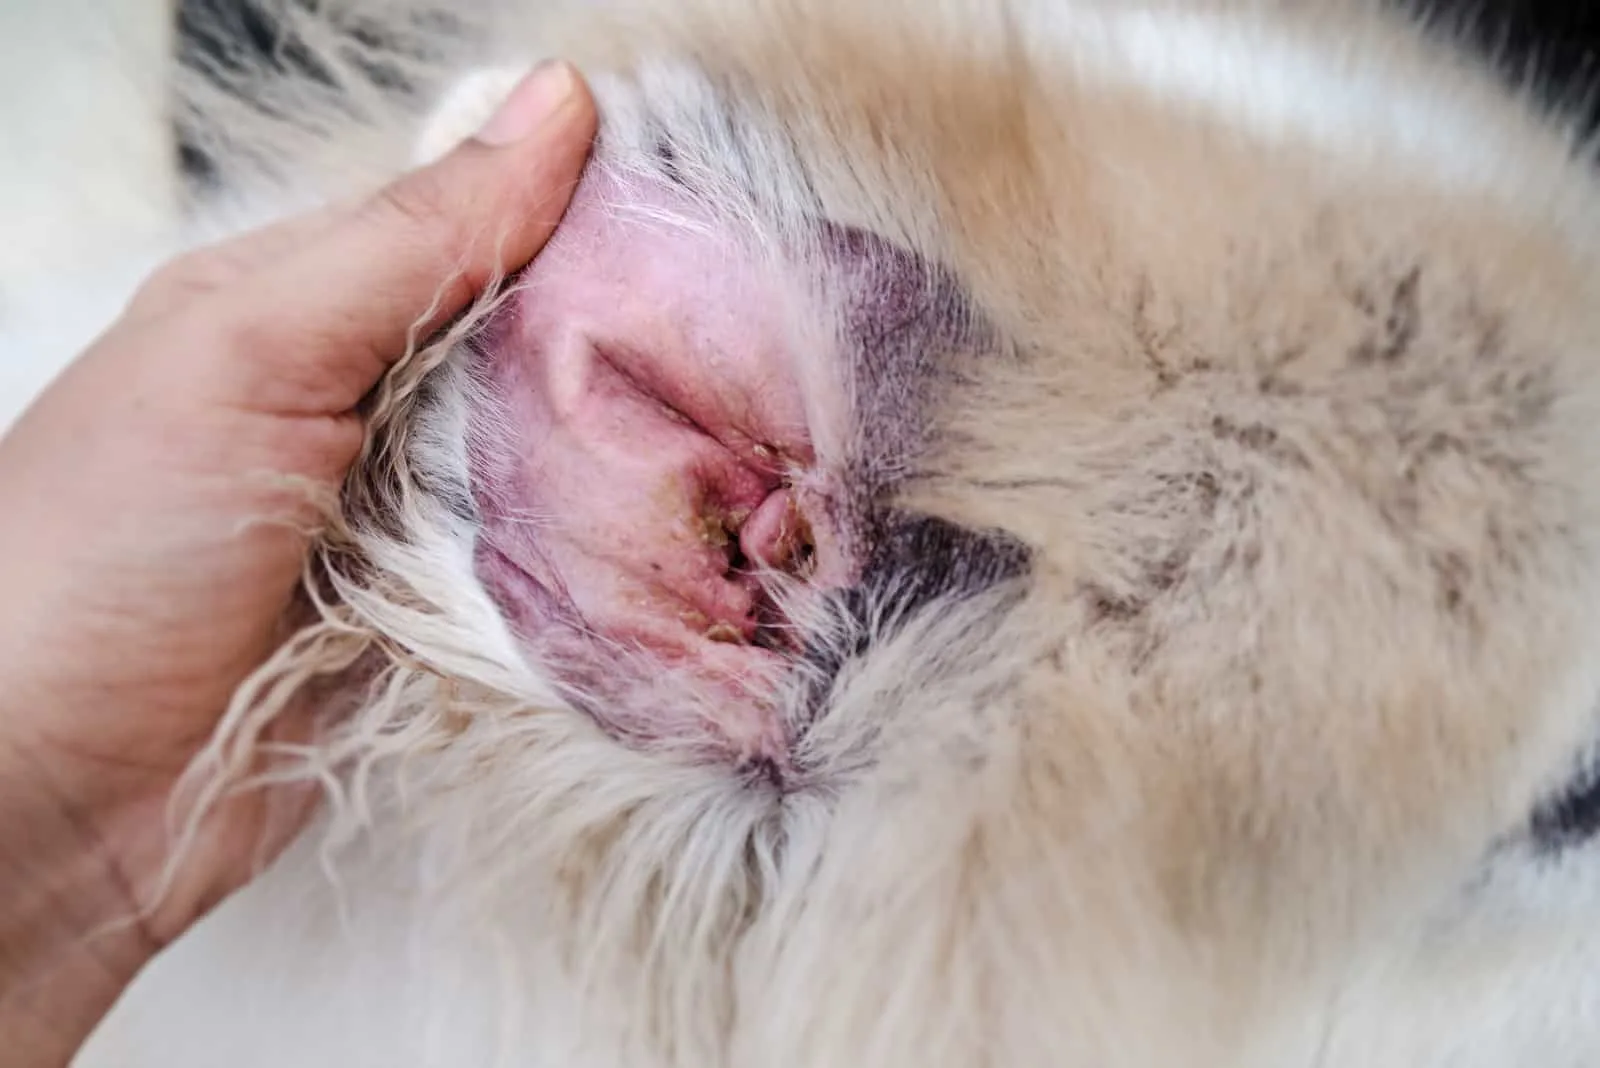 infected dog's ear with Malassezia pachydermatis